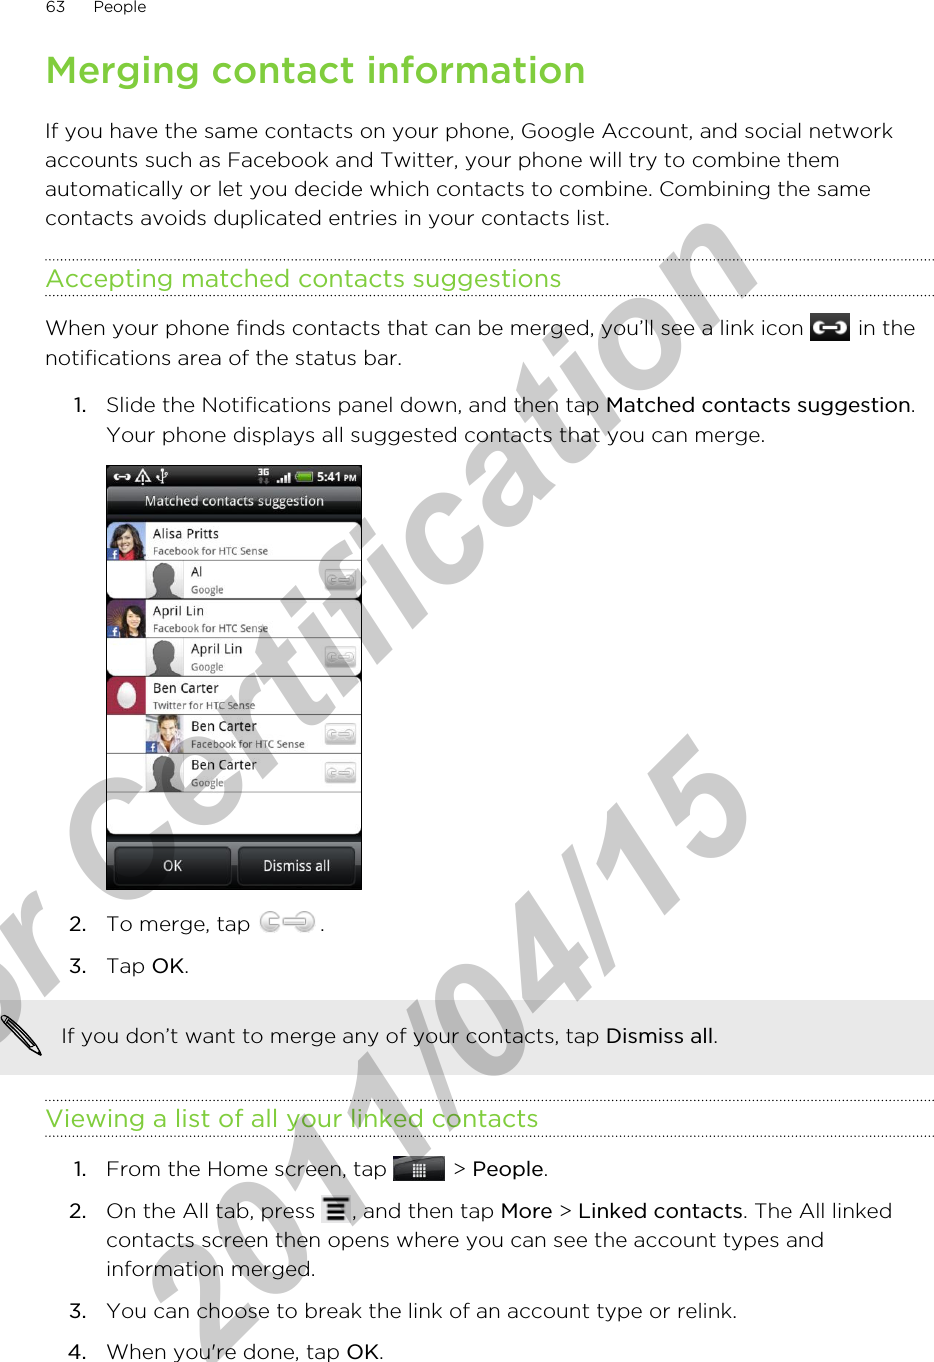 Merging contact informationIf you have the same contacts on your phone, Google Account, and social networkaccounts such as Facebook and Twitter, your phone will try to combine themautomatically or let you decide which contacts to combine. Combining the samecontacts avoids duplicated entries in your contacts list.Accepting matched contacts suggestionsWhen your phone finds contacts that can be merged, you’ll see a link icon   in thenotifications area of the status bar.1. Slide the Notifications panel down, and then tap Matched contacts suggestion.Your phone displays all suggested contacts that you can merge.2. To merge, tap  .3. Tap OK.If you don’t want to merge any of your contacts, tap Dismiss all.Viewing a list of all your linked contacts1. From the Home screen, tap   &gt; People.2. On the All tab, press  , and then tap More &gt; Linked contacts. The All linkedcontacts screen then opens where you can see the account types andinformation merged.3. You can choose to break the link of an account type or relink.4. When you&apos;re done, tap OK.63 Peoplefor Certification  2011/04/15